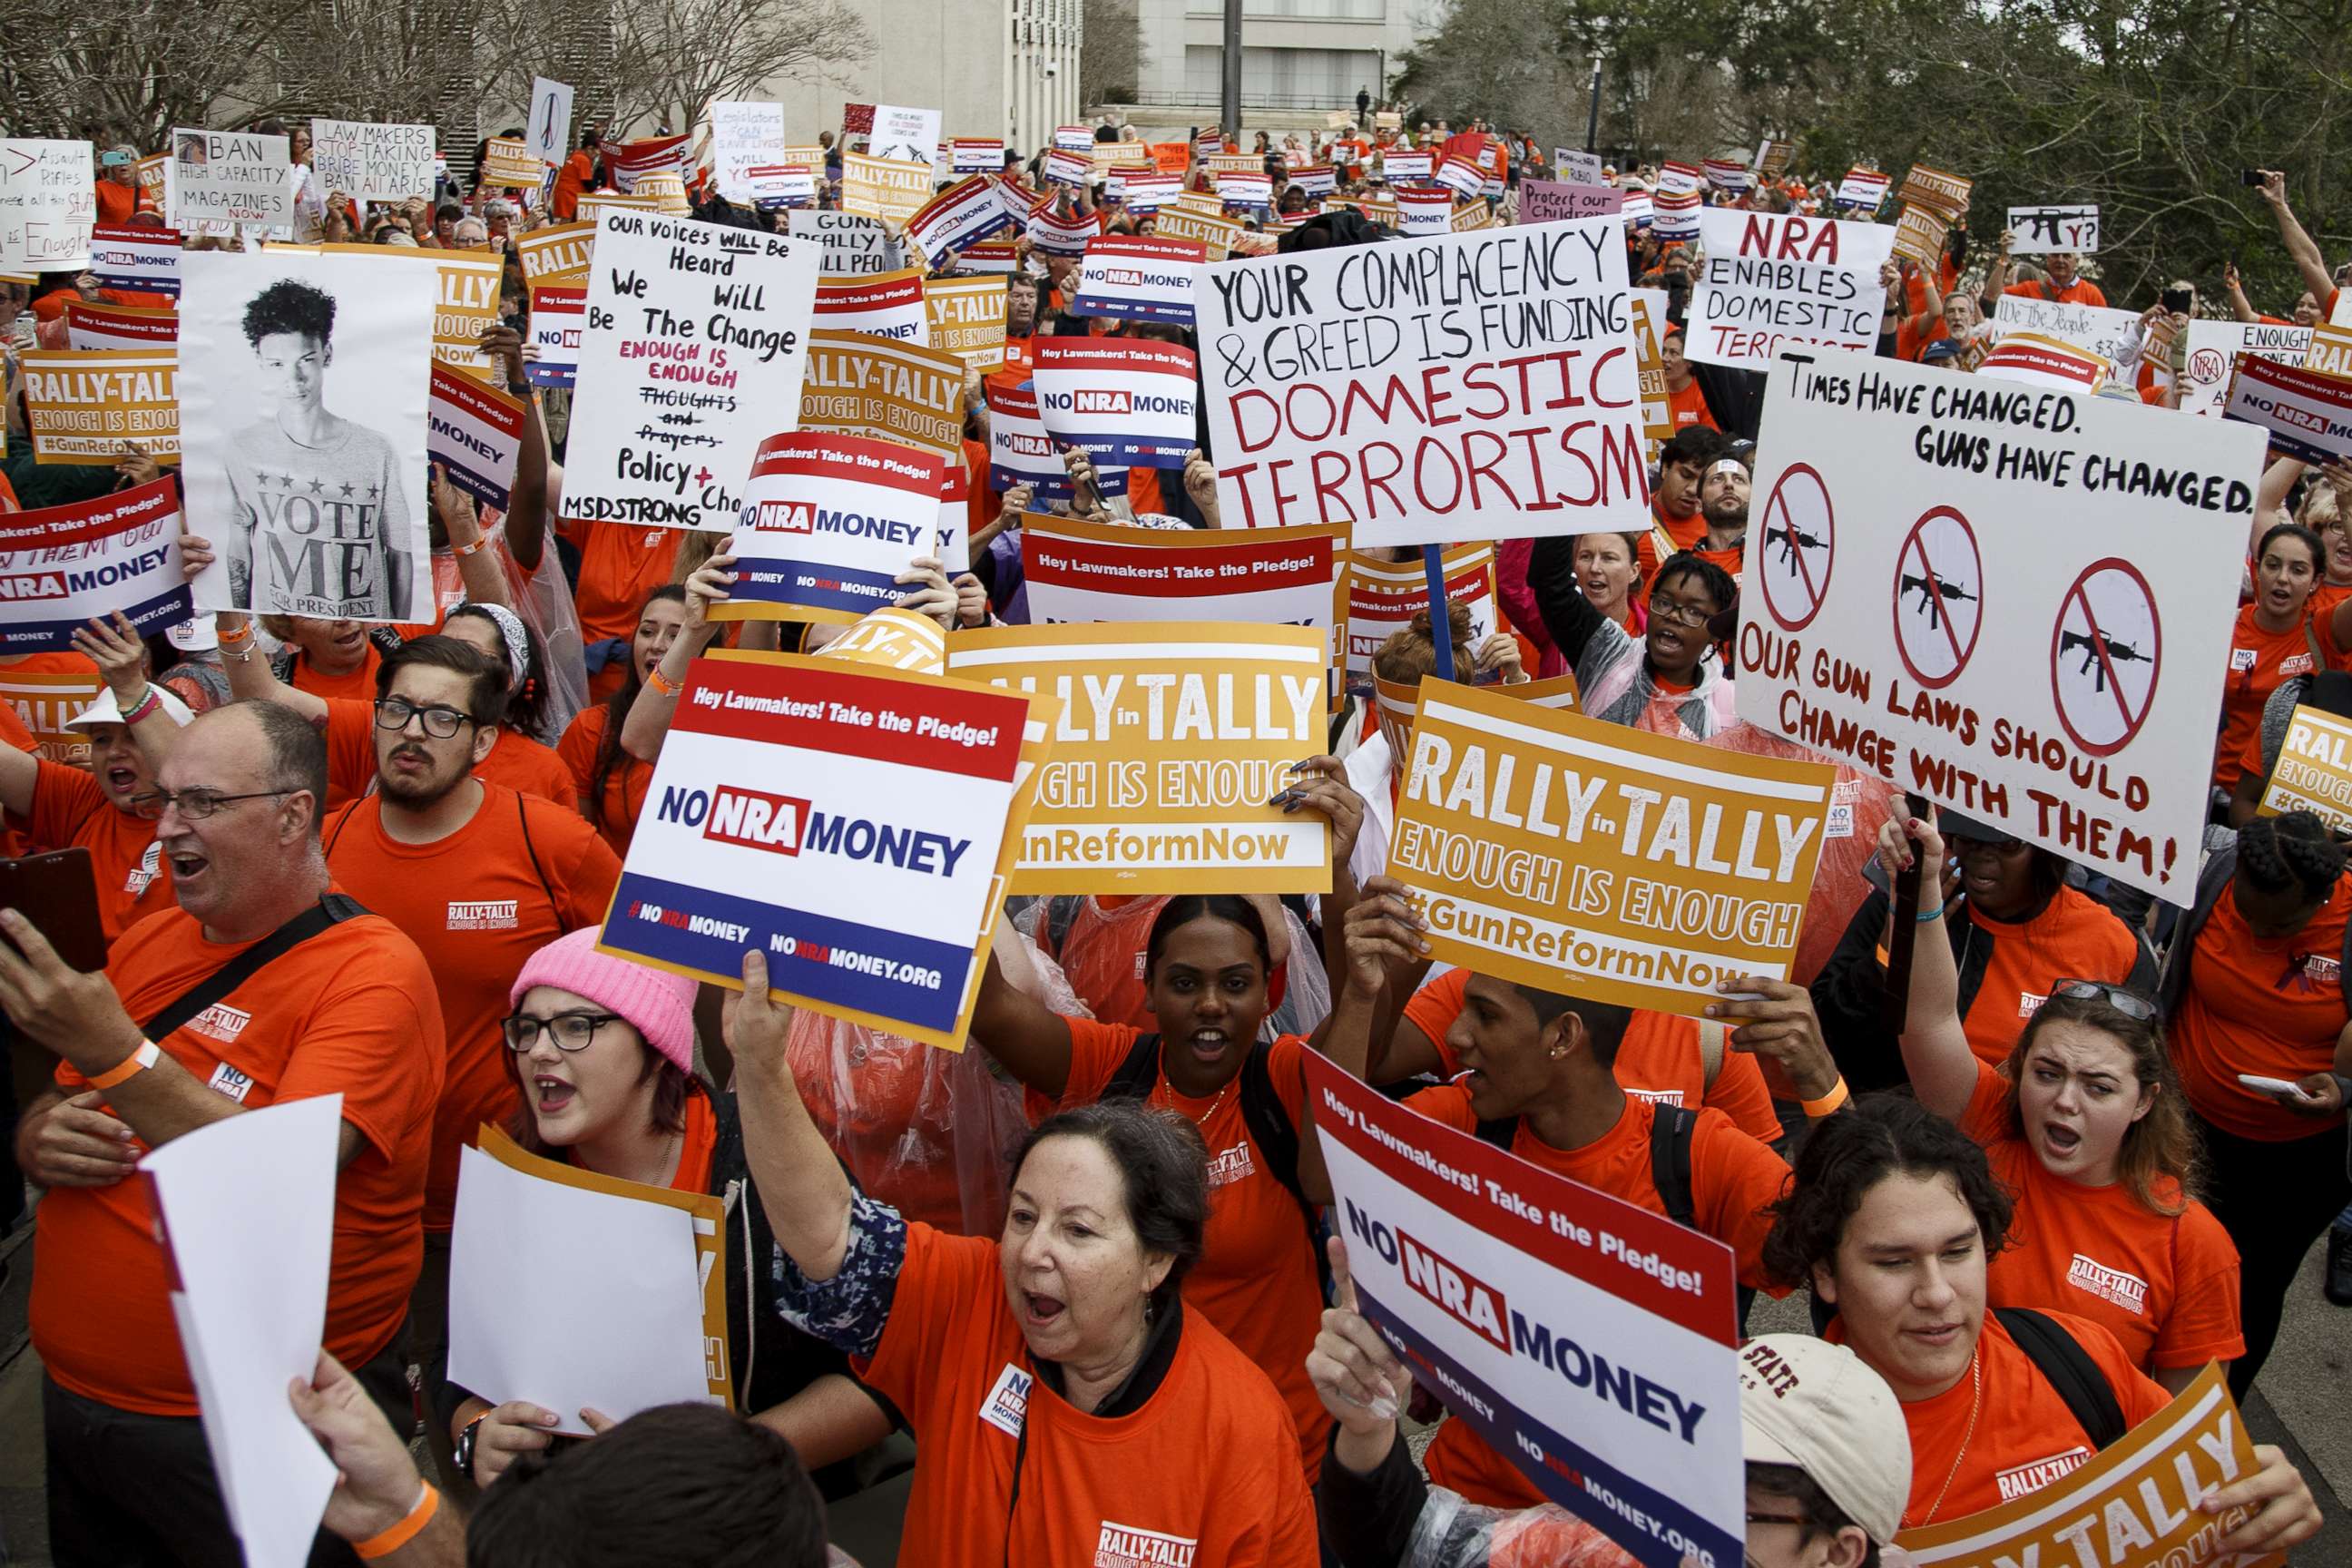 PHOTO: Activists hold up signs at the Florida State Capitol as they rally for gun reform legislation, Feb. 26, 2018, in Tallahassee, Fla.